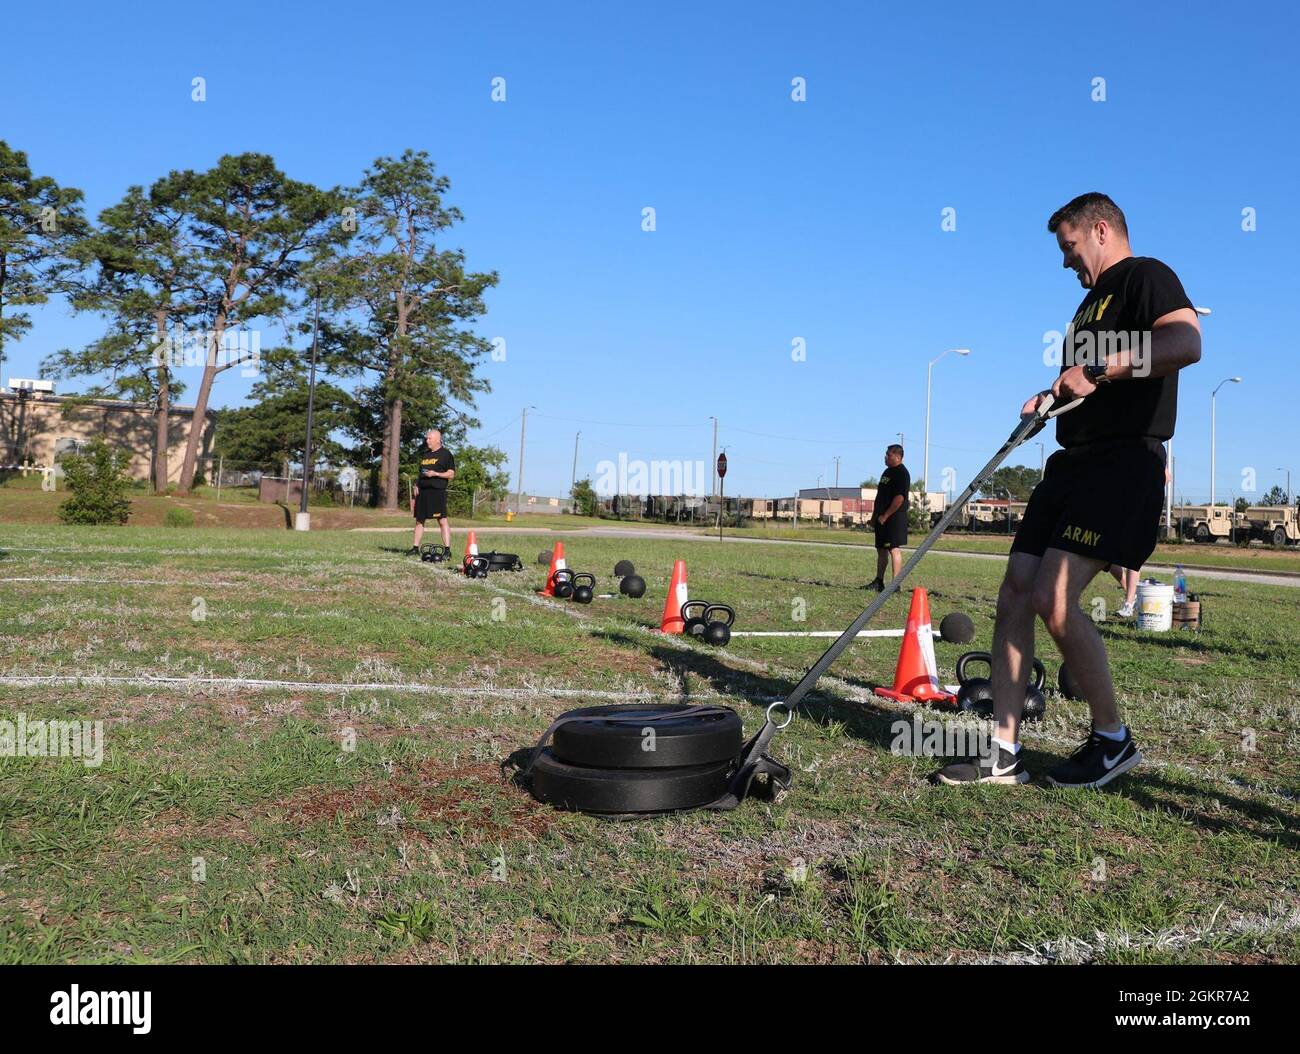 Maj. Mark D. Montgomery, chief of Training for USACAPOC(A) G3, completes the sled drag portion of the 250 meter sprint, drag, carry event during the Army Combat Fitness Test (ACFT) 3.0, June 22, 2021, at Fort Bragg, N.C. The U.S. Army Reserve Soldiers of USACAPOC(A) headquarters conducted a diagnostic ACFT to assess fitness and prepare for the future ACFT. Stock Photo